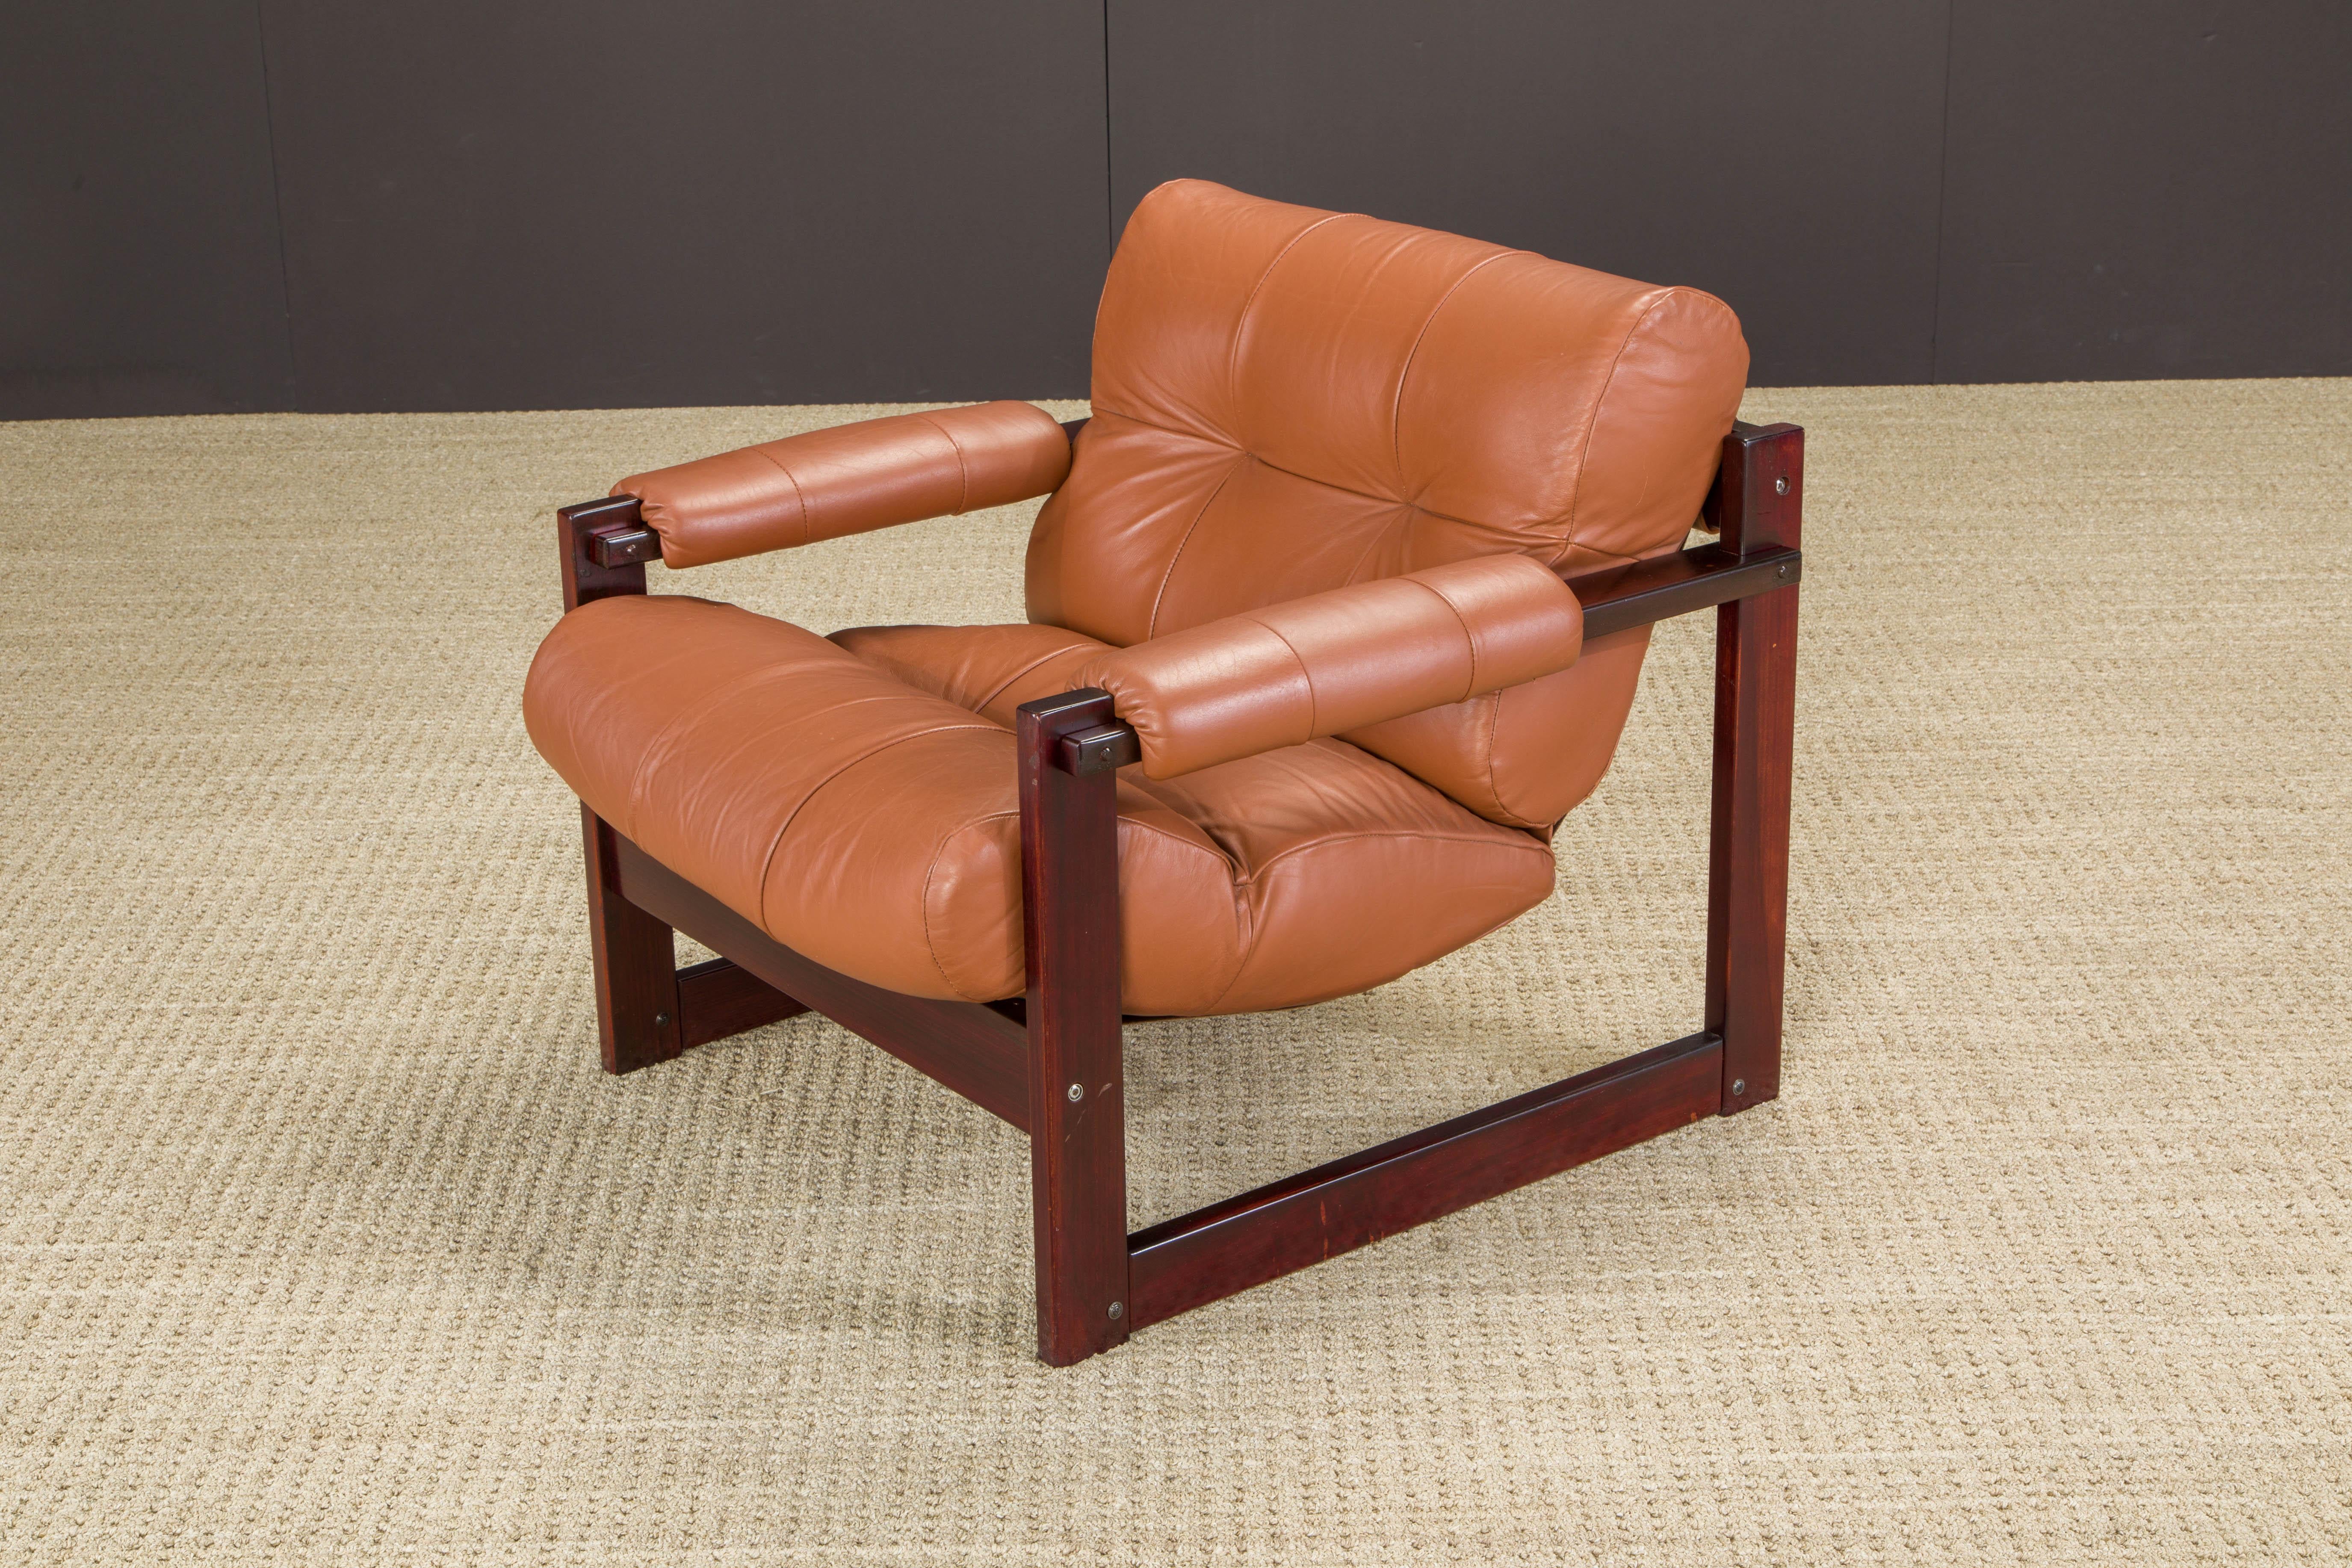 Percival Lafer 'S-1' Rosewood and Leather Lounge Chairs, Brazil, 1976, Signed For Sale 4